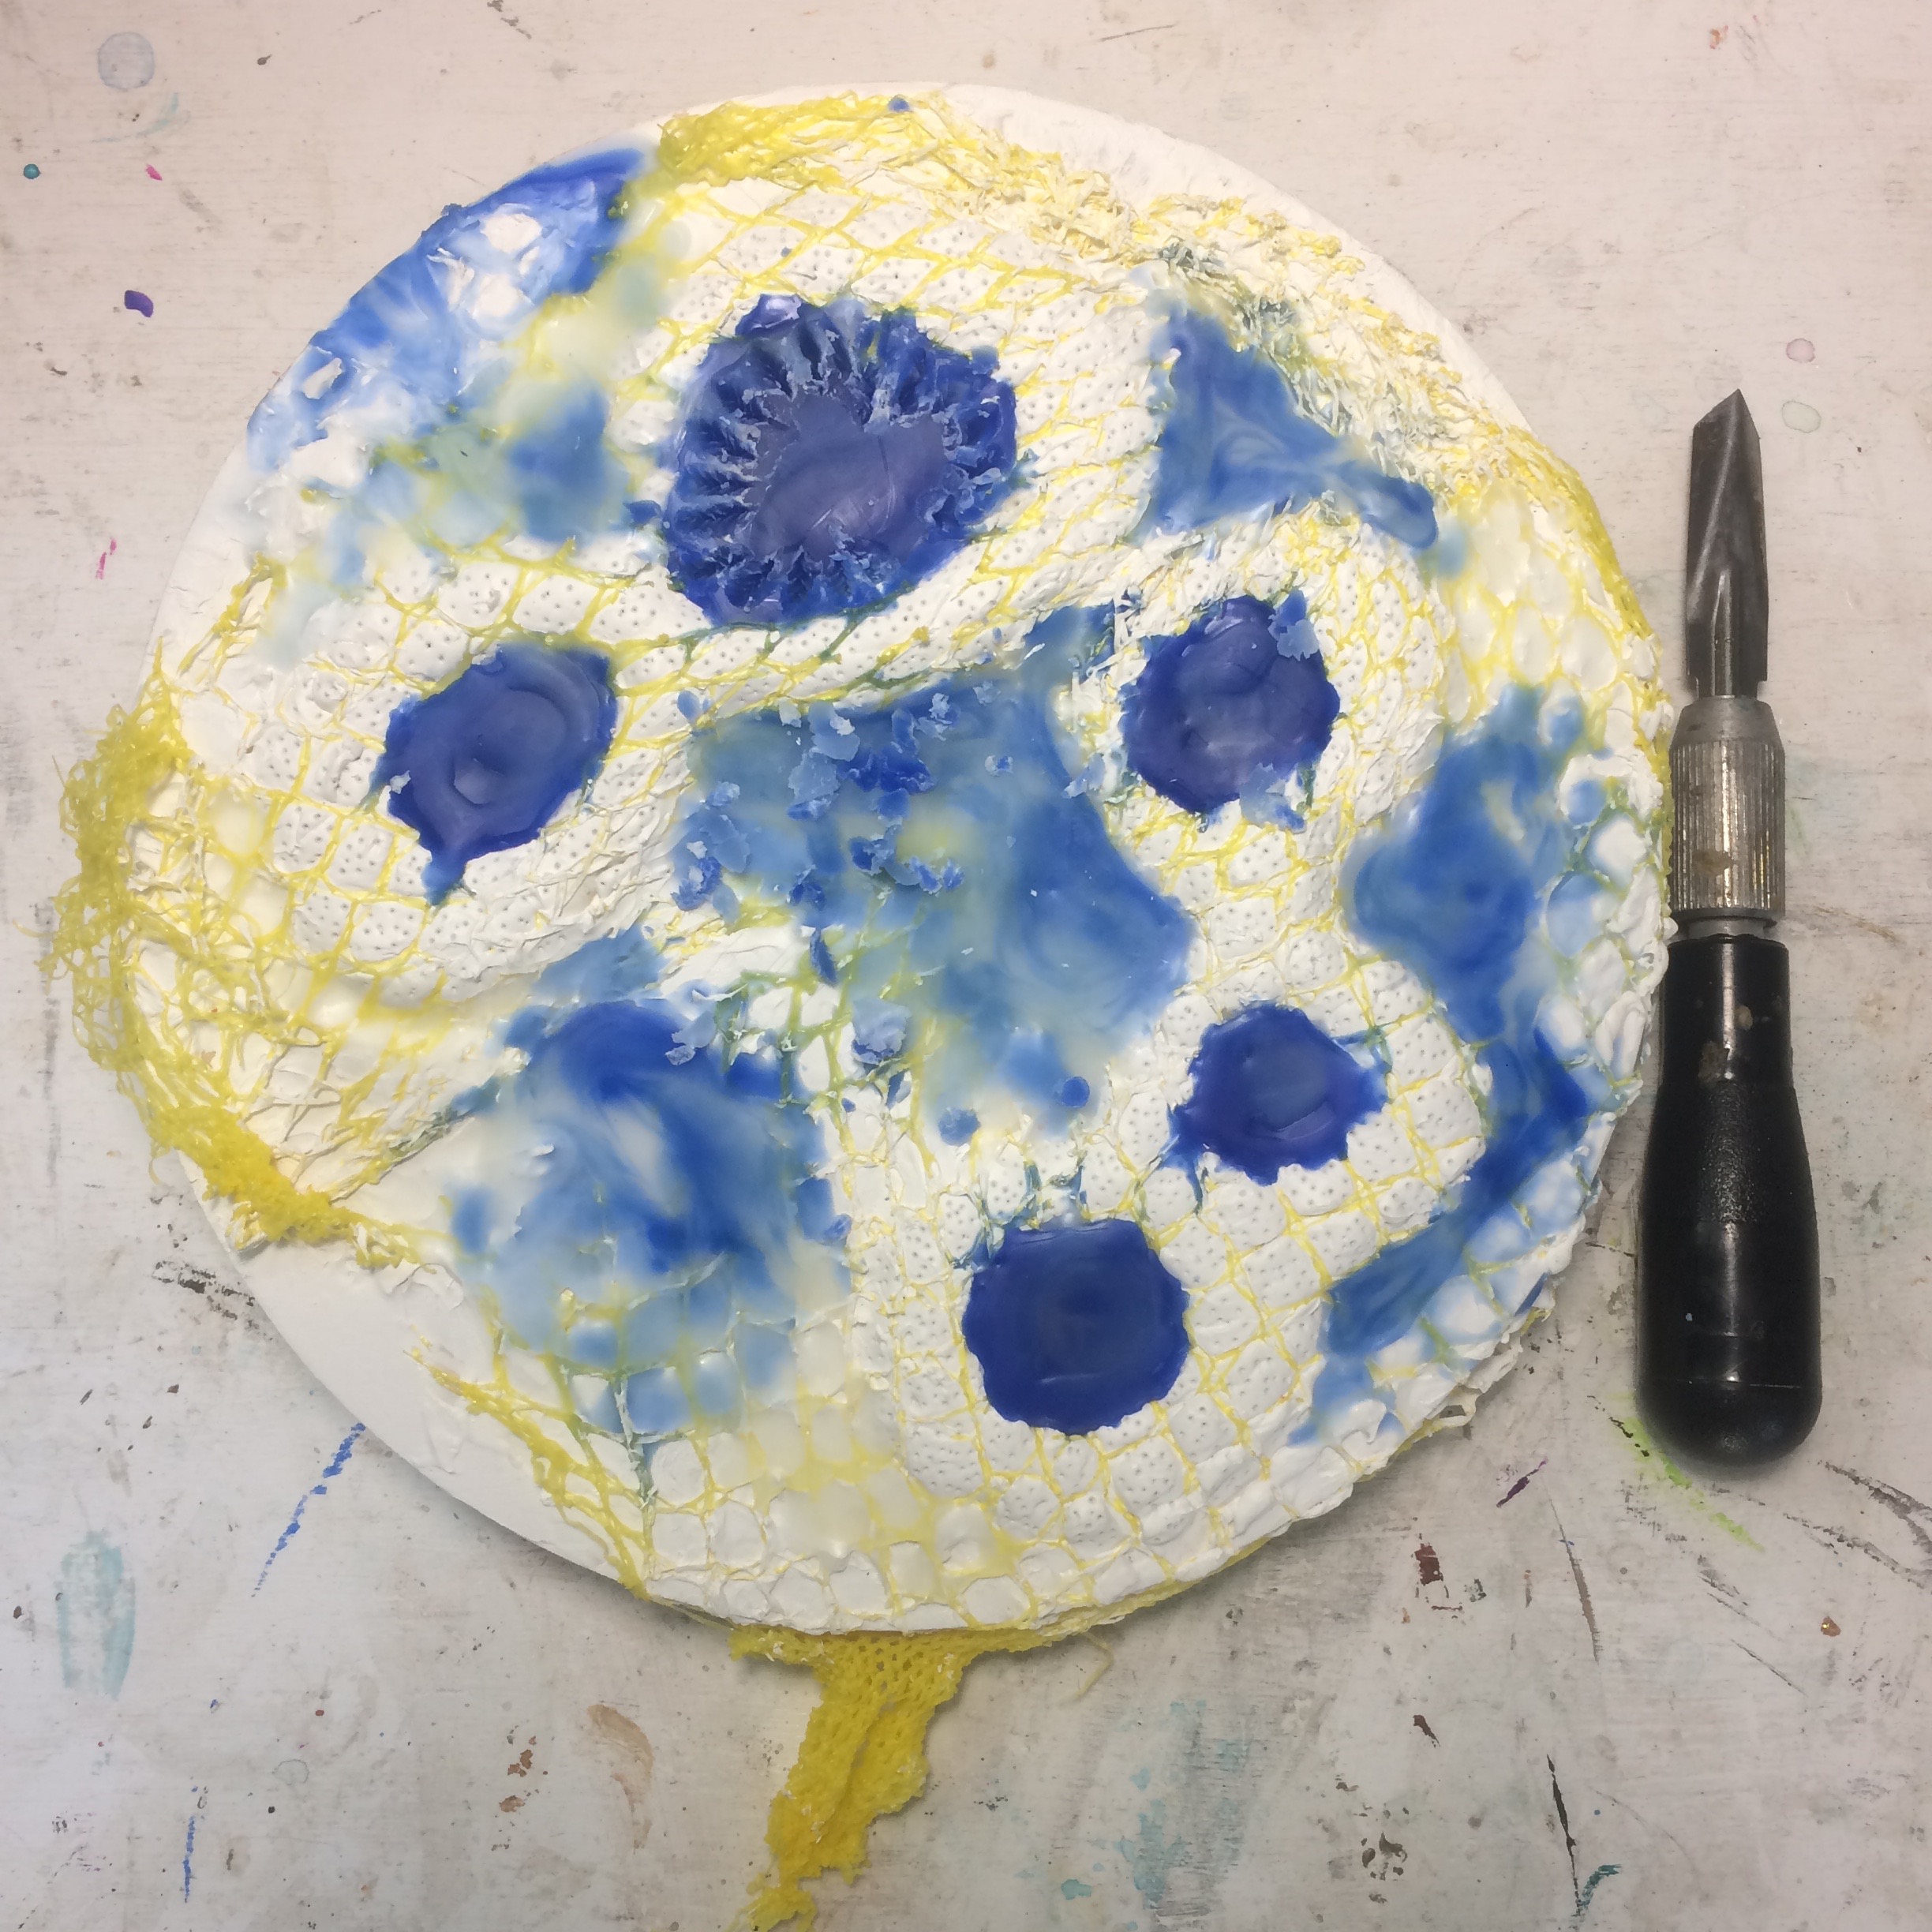 (A) Start, heavy gesso, poked with pin, lemon bag. (K) Blue wax, textured. 